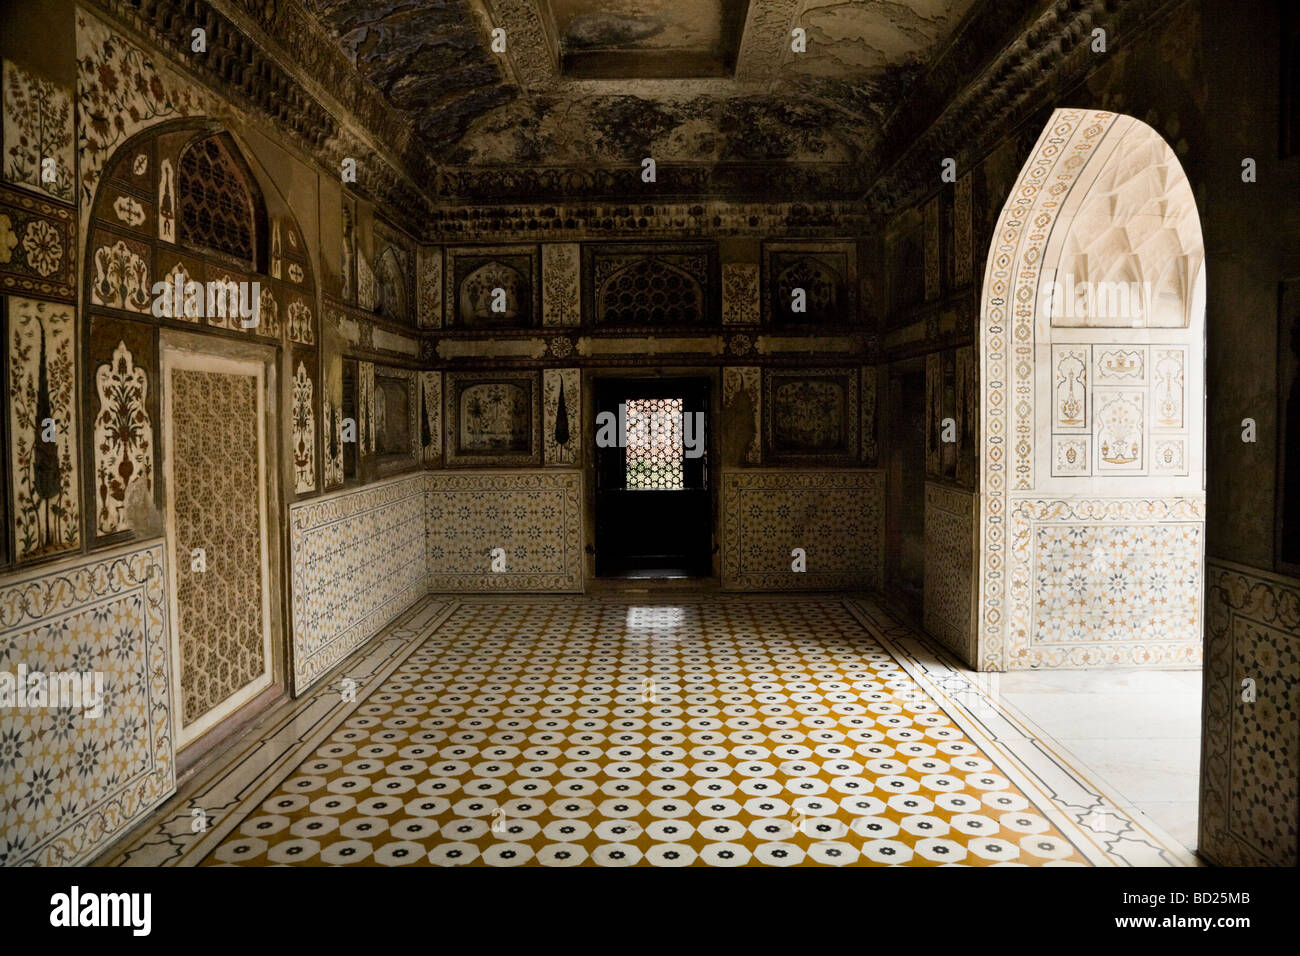 Inside a room or ante-chamber of Itmad-ud-Daulah's Tomb mausoleum. Agra. India. Stock Photo